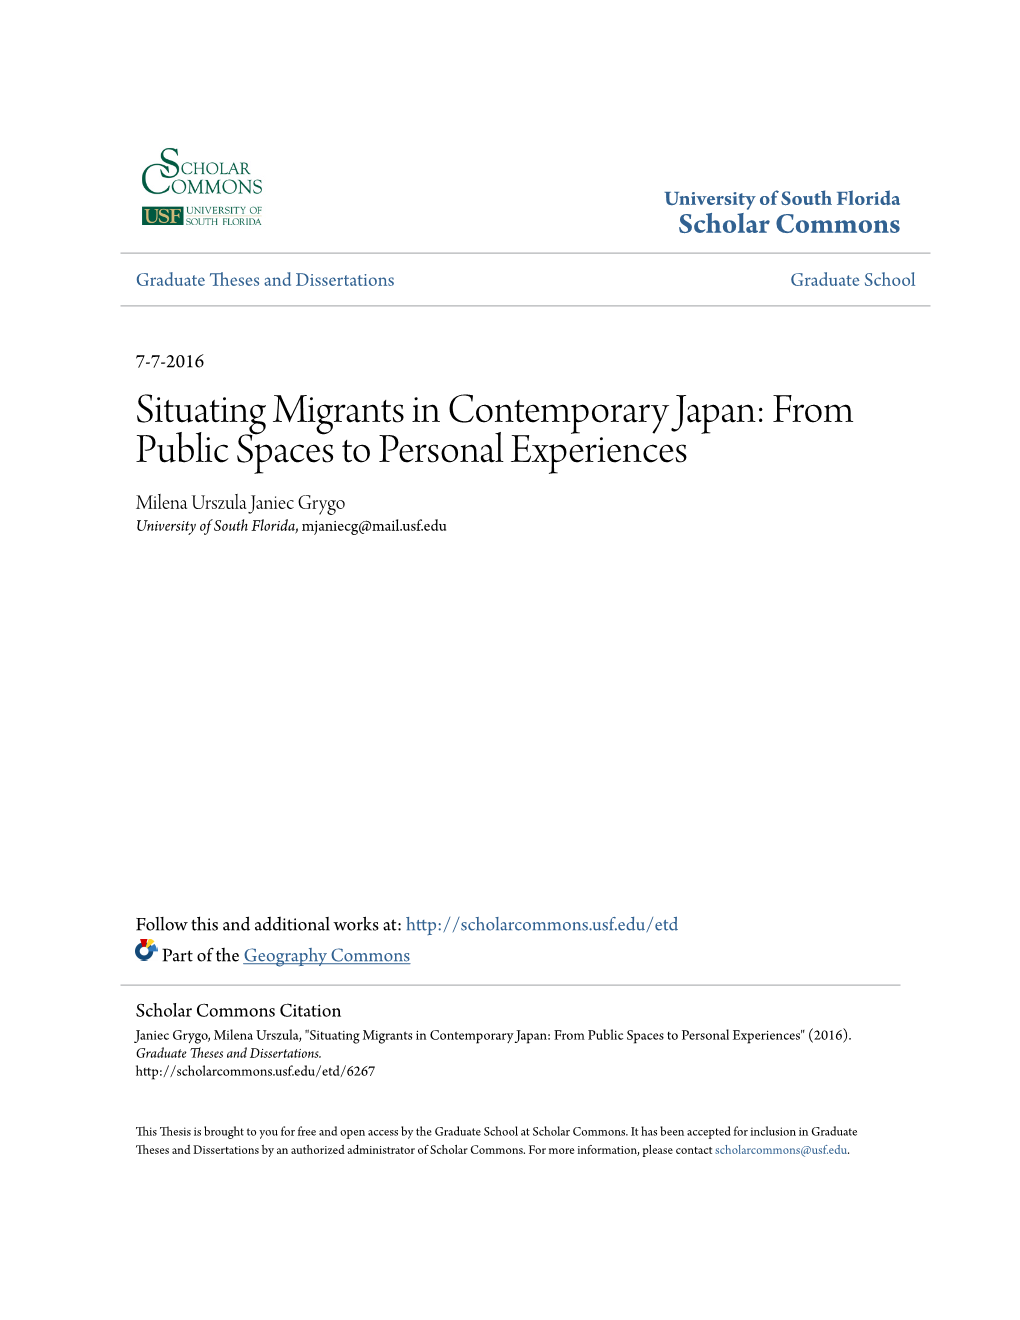 Situating Migrants in Contemporary Japan: from Public Spaces to Personal Experiences Milena Urszula Janiec Grygo University of South Florida, Mjaniecg@Mail.Usf.Edu